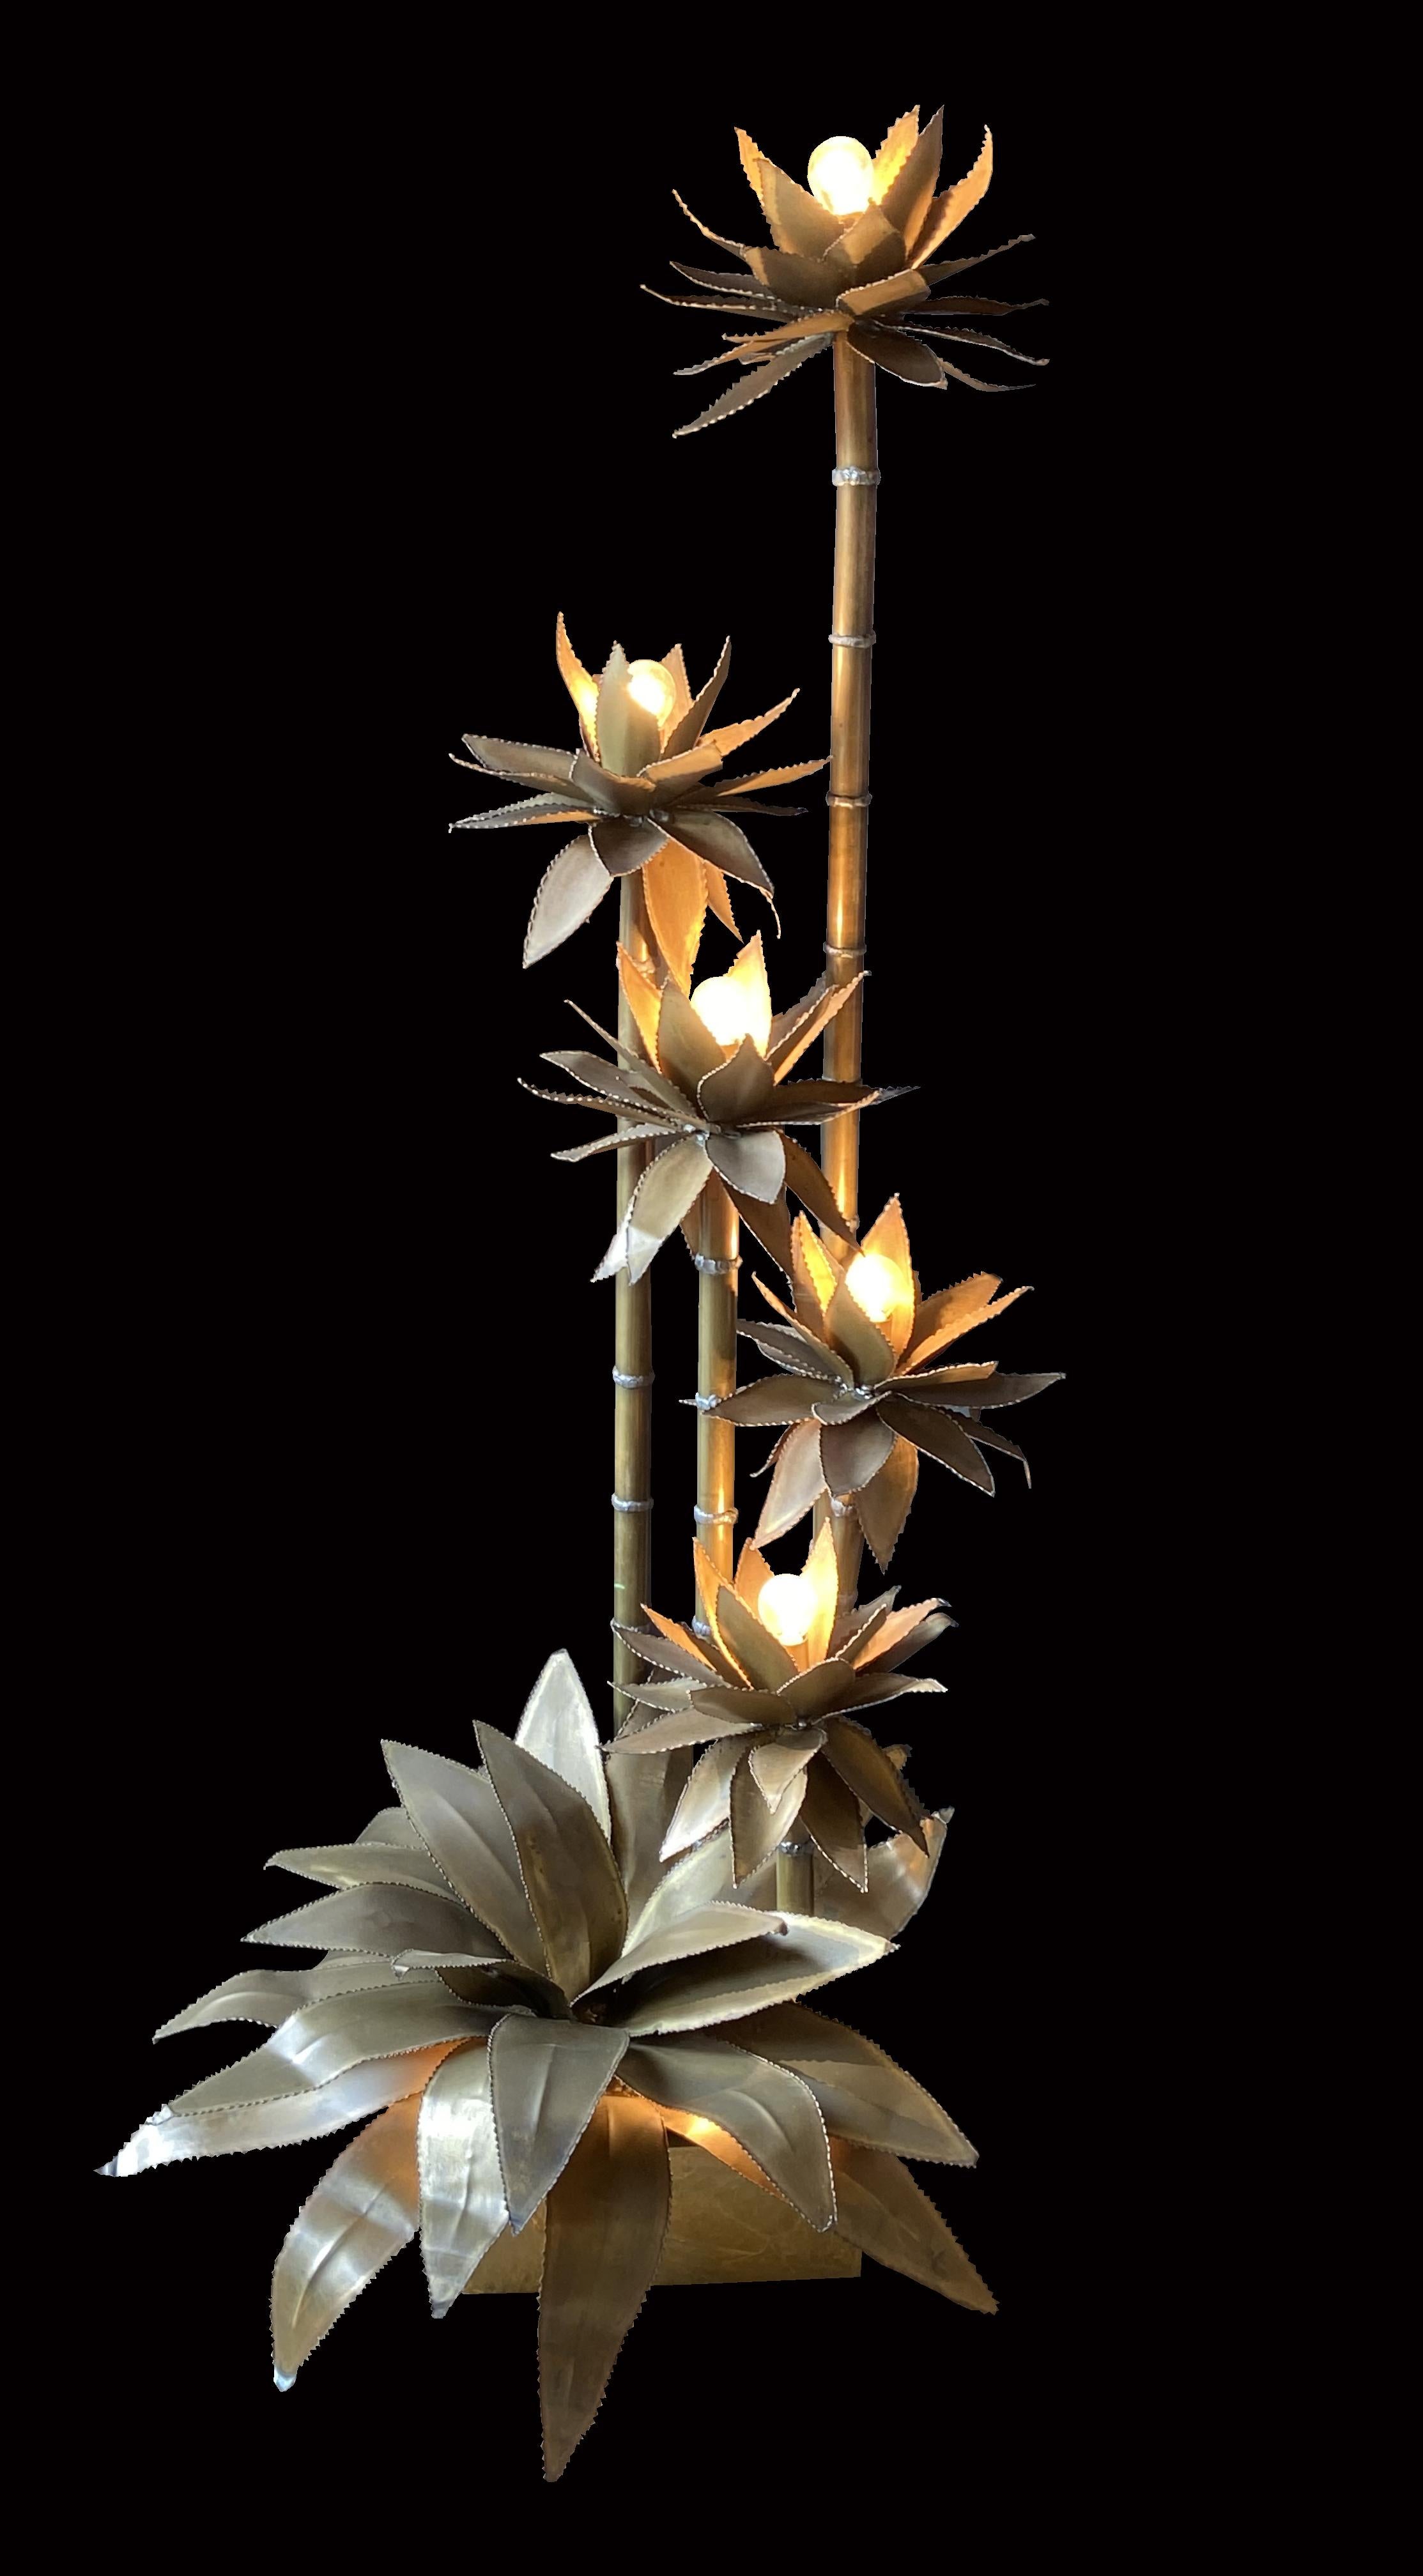 This stunning floor lamp is made from brass tubing for the bamboo type stems and brass sheet for the leaves, very much in the style of Maison Jensen.
It has a total of 7-light bulbs giving a wonderful effect when illuminated with the many and